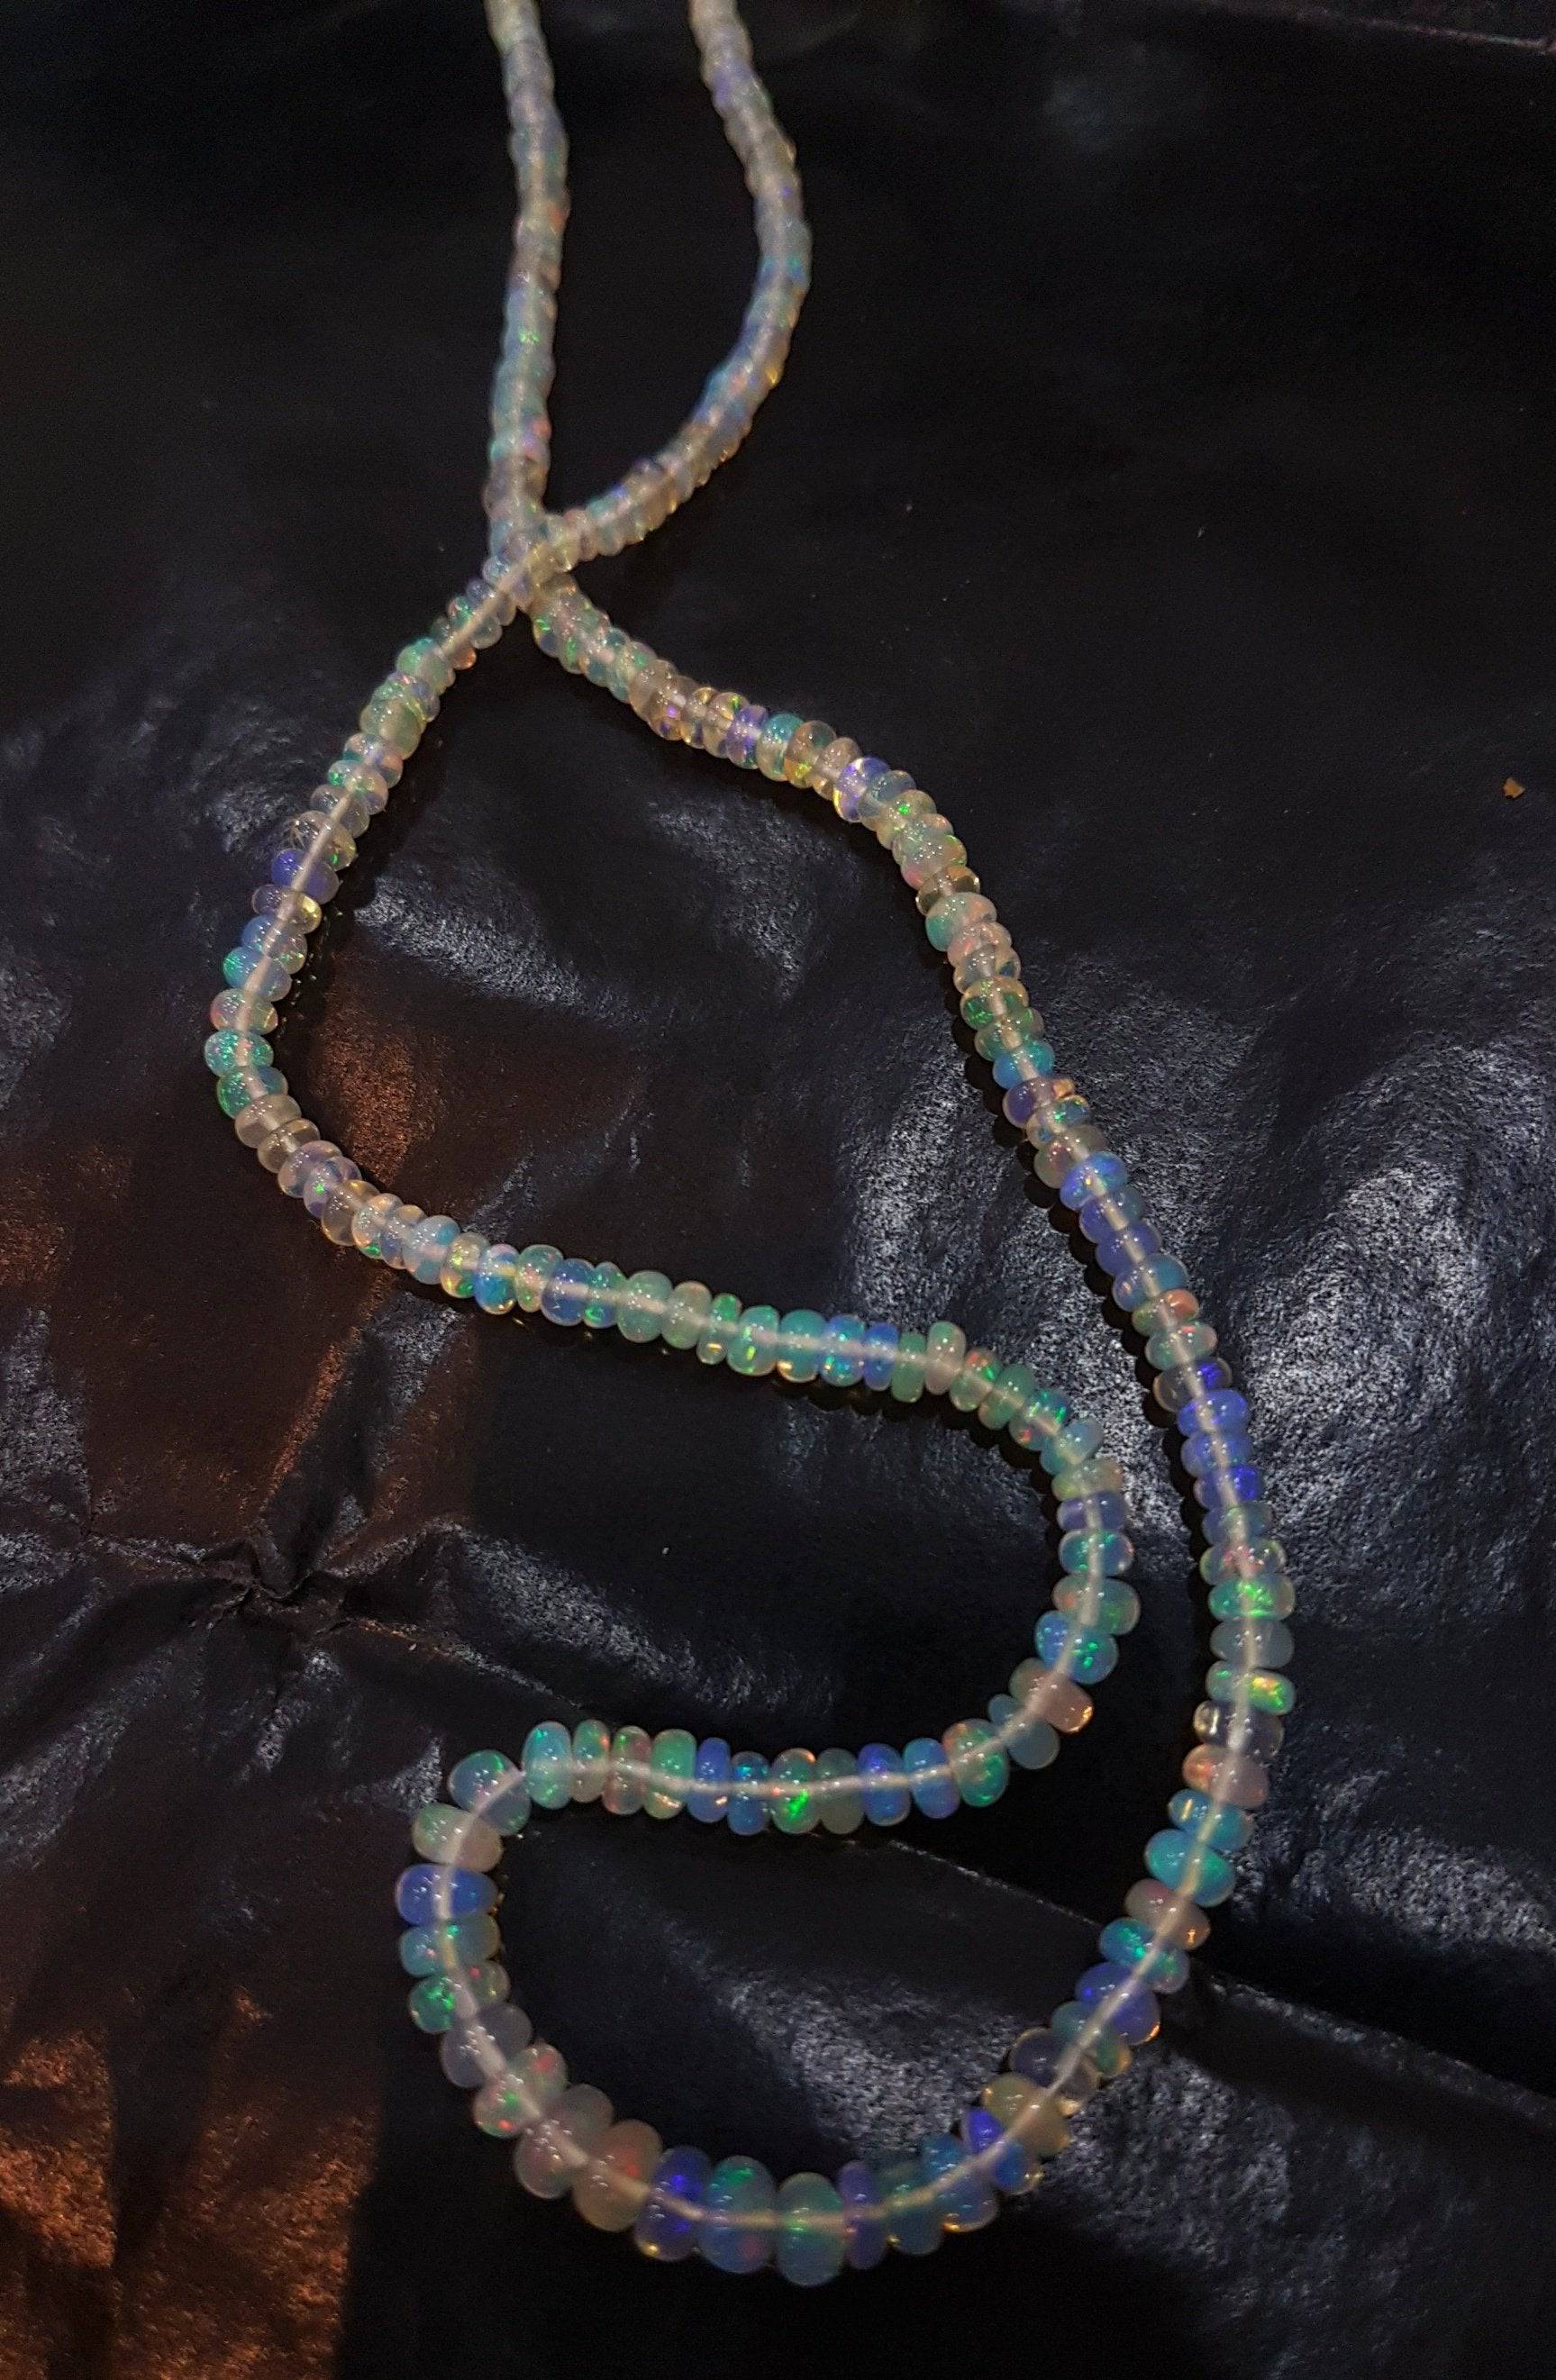 Opal Beads 17 Inches 3.5-4mm Graduated Beads UNTREATED - The LabradoriteKing